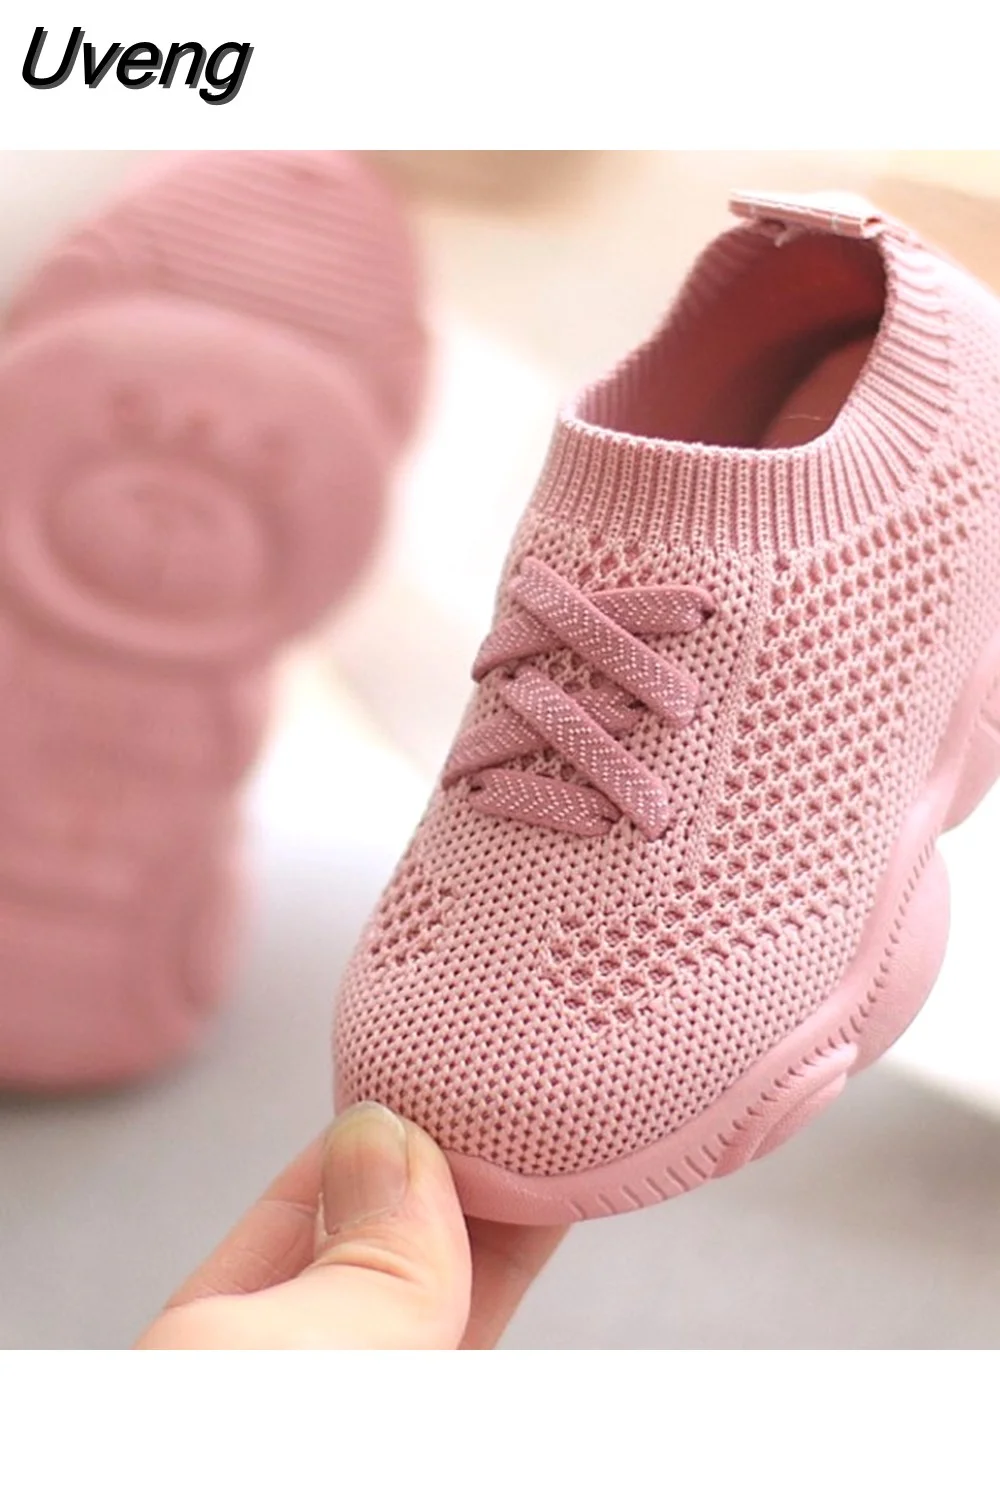 Uveng Shoes Antislip Soft Bottom Baby Sneaker Casual Flat Sneakers Shoes Children size Girls Boys Sports Shoes 420-1